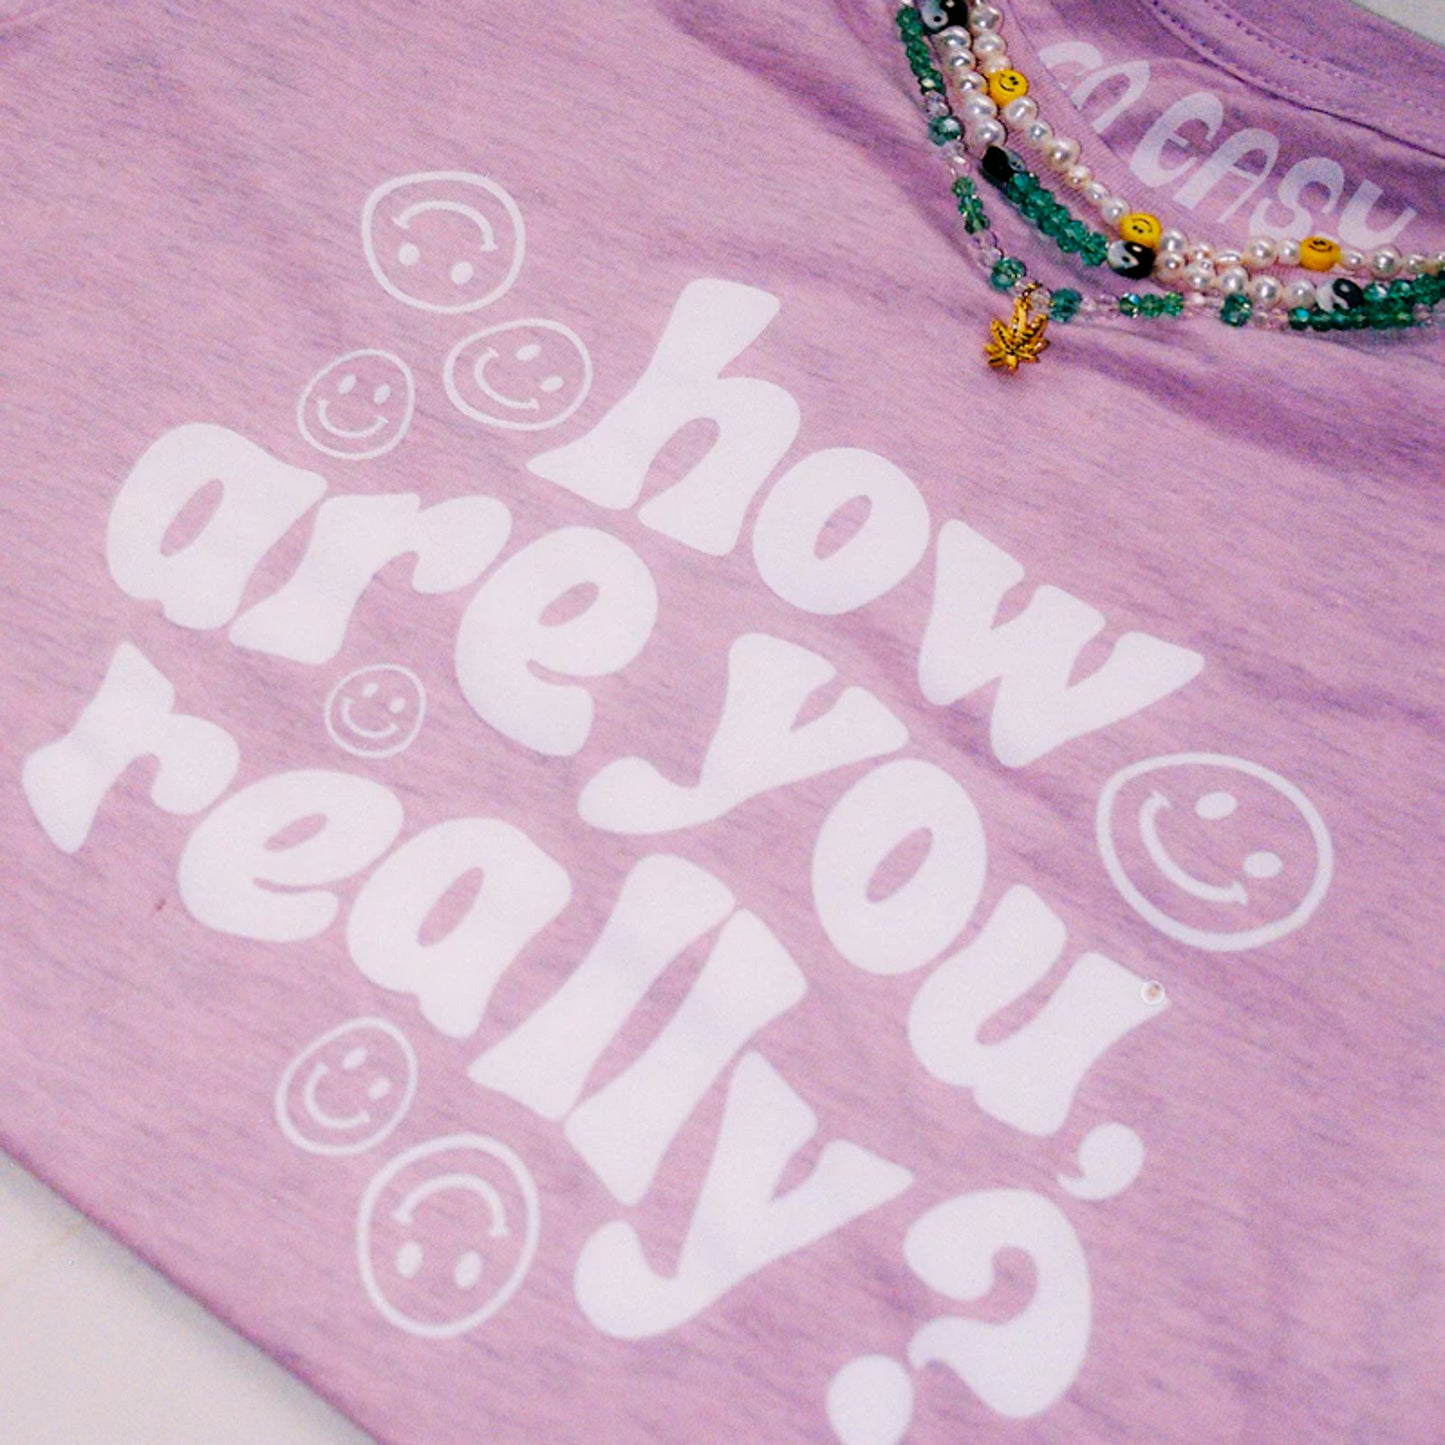 How Are You Really? Shirt.